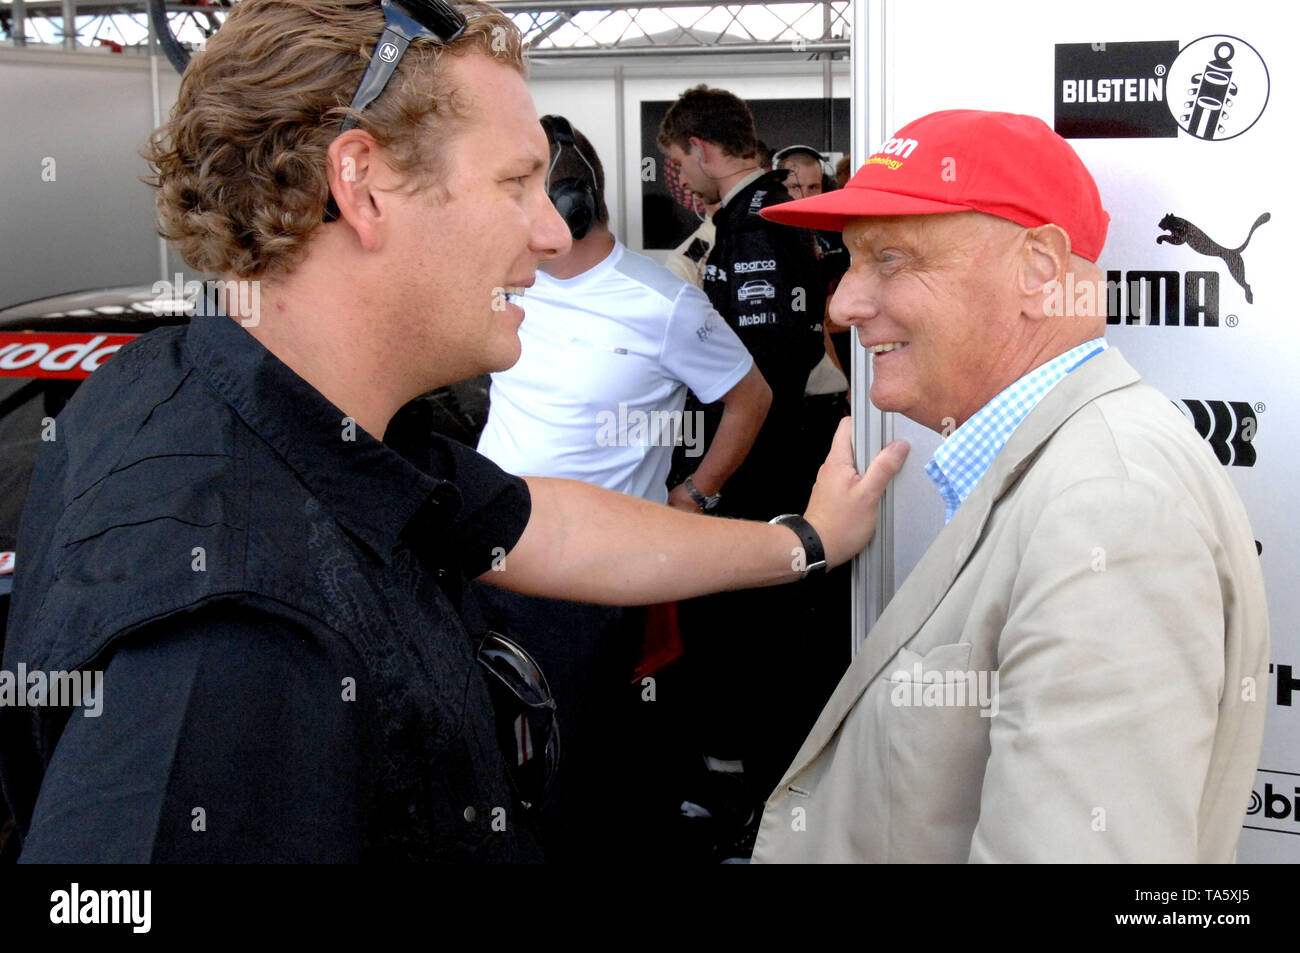 Lukas Lauda High Resolution Stock Photography and Images - Alamy